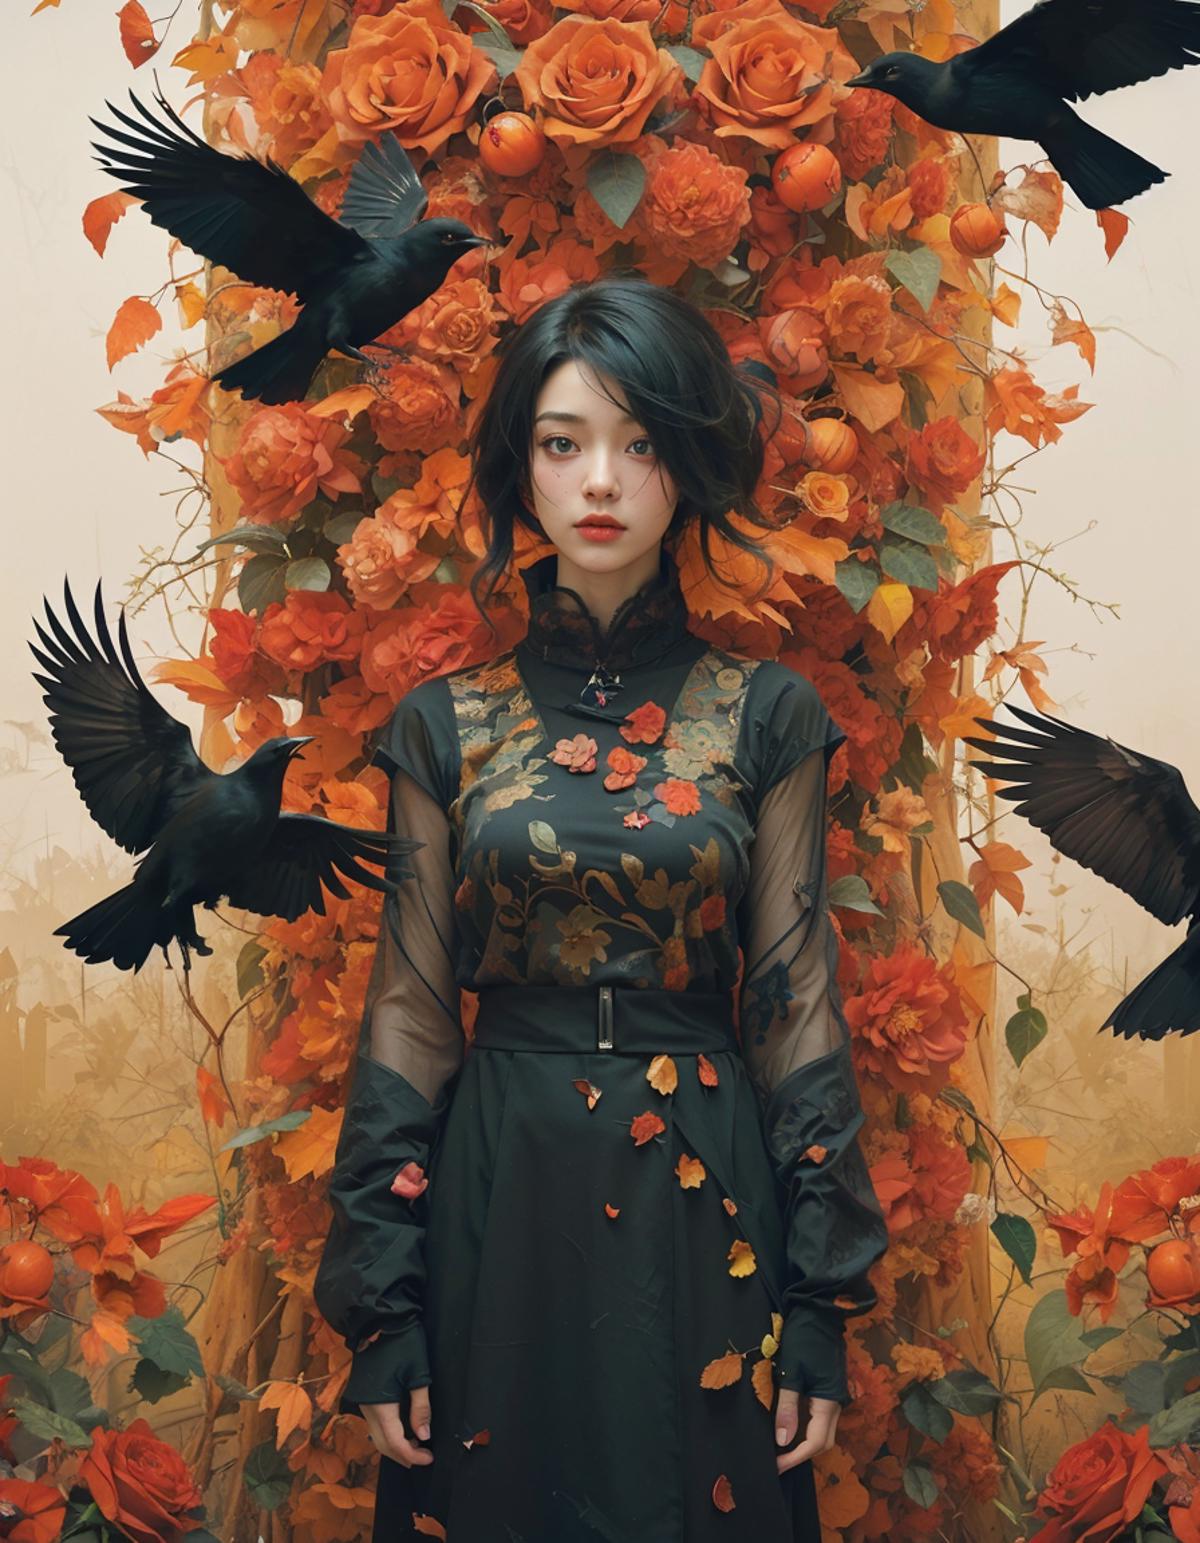 A woman stands in a field of flowers with a flock of birds around her, wearing a black dress.